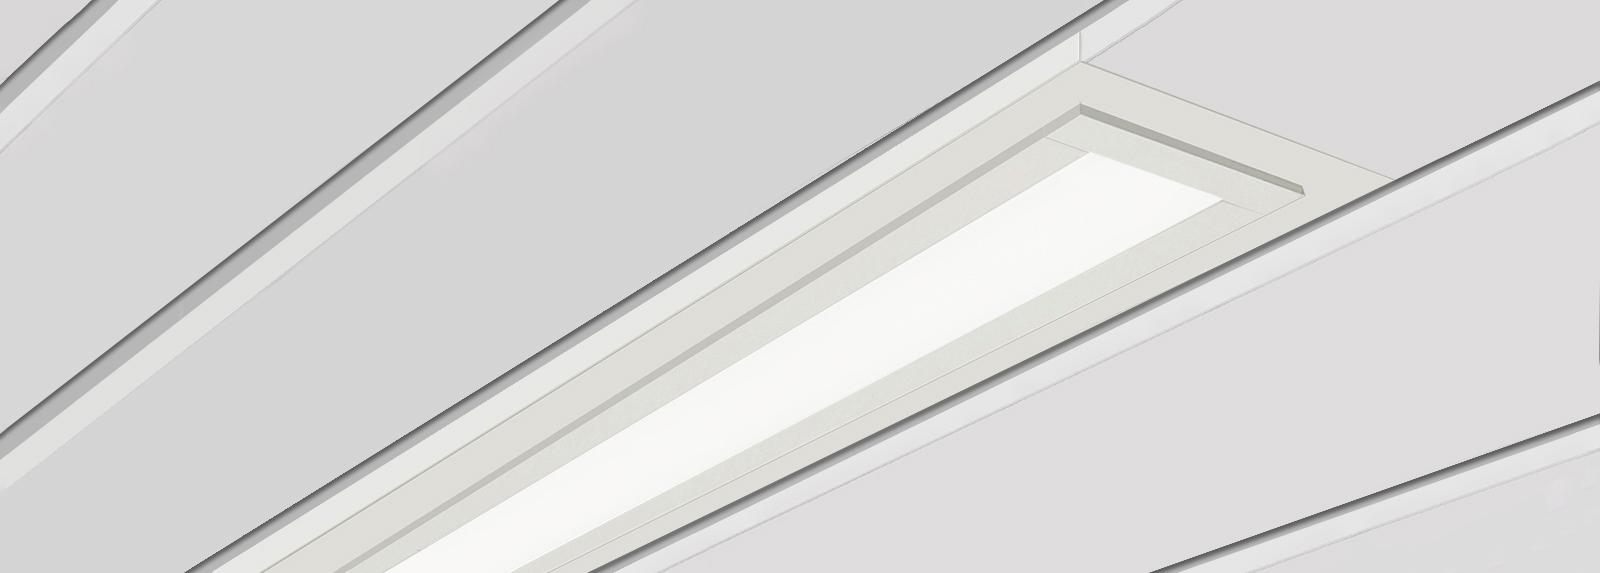 GEOR 100 | Recessed linear downlights for lighting replacement